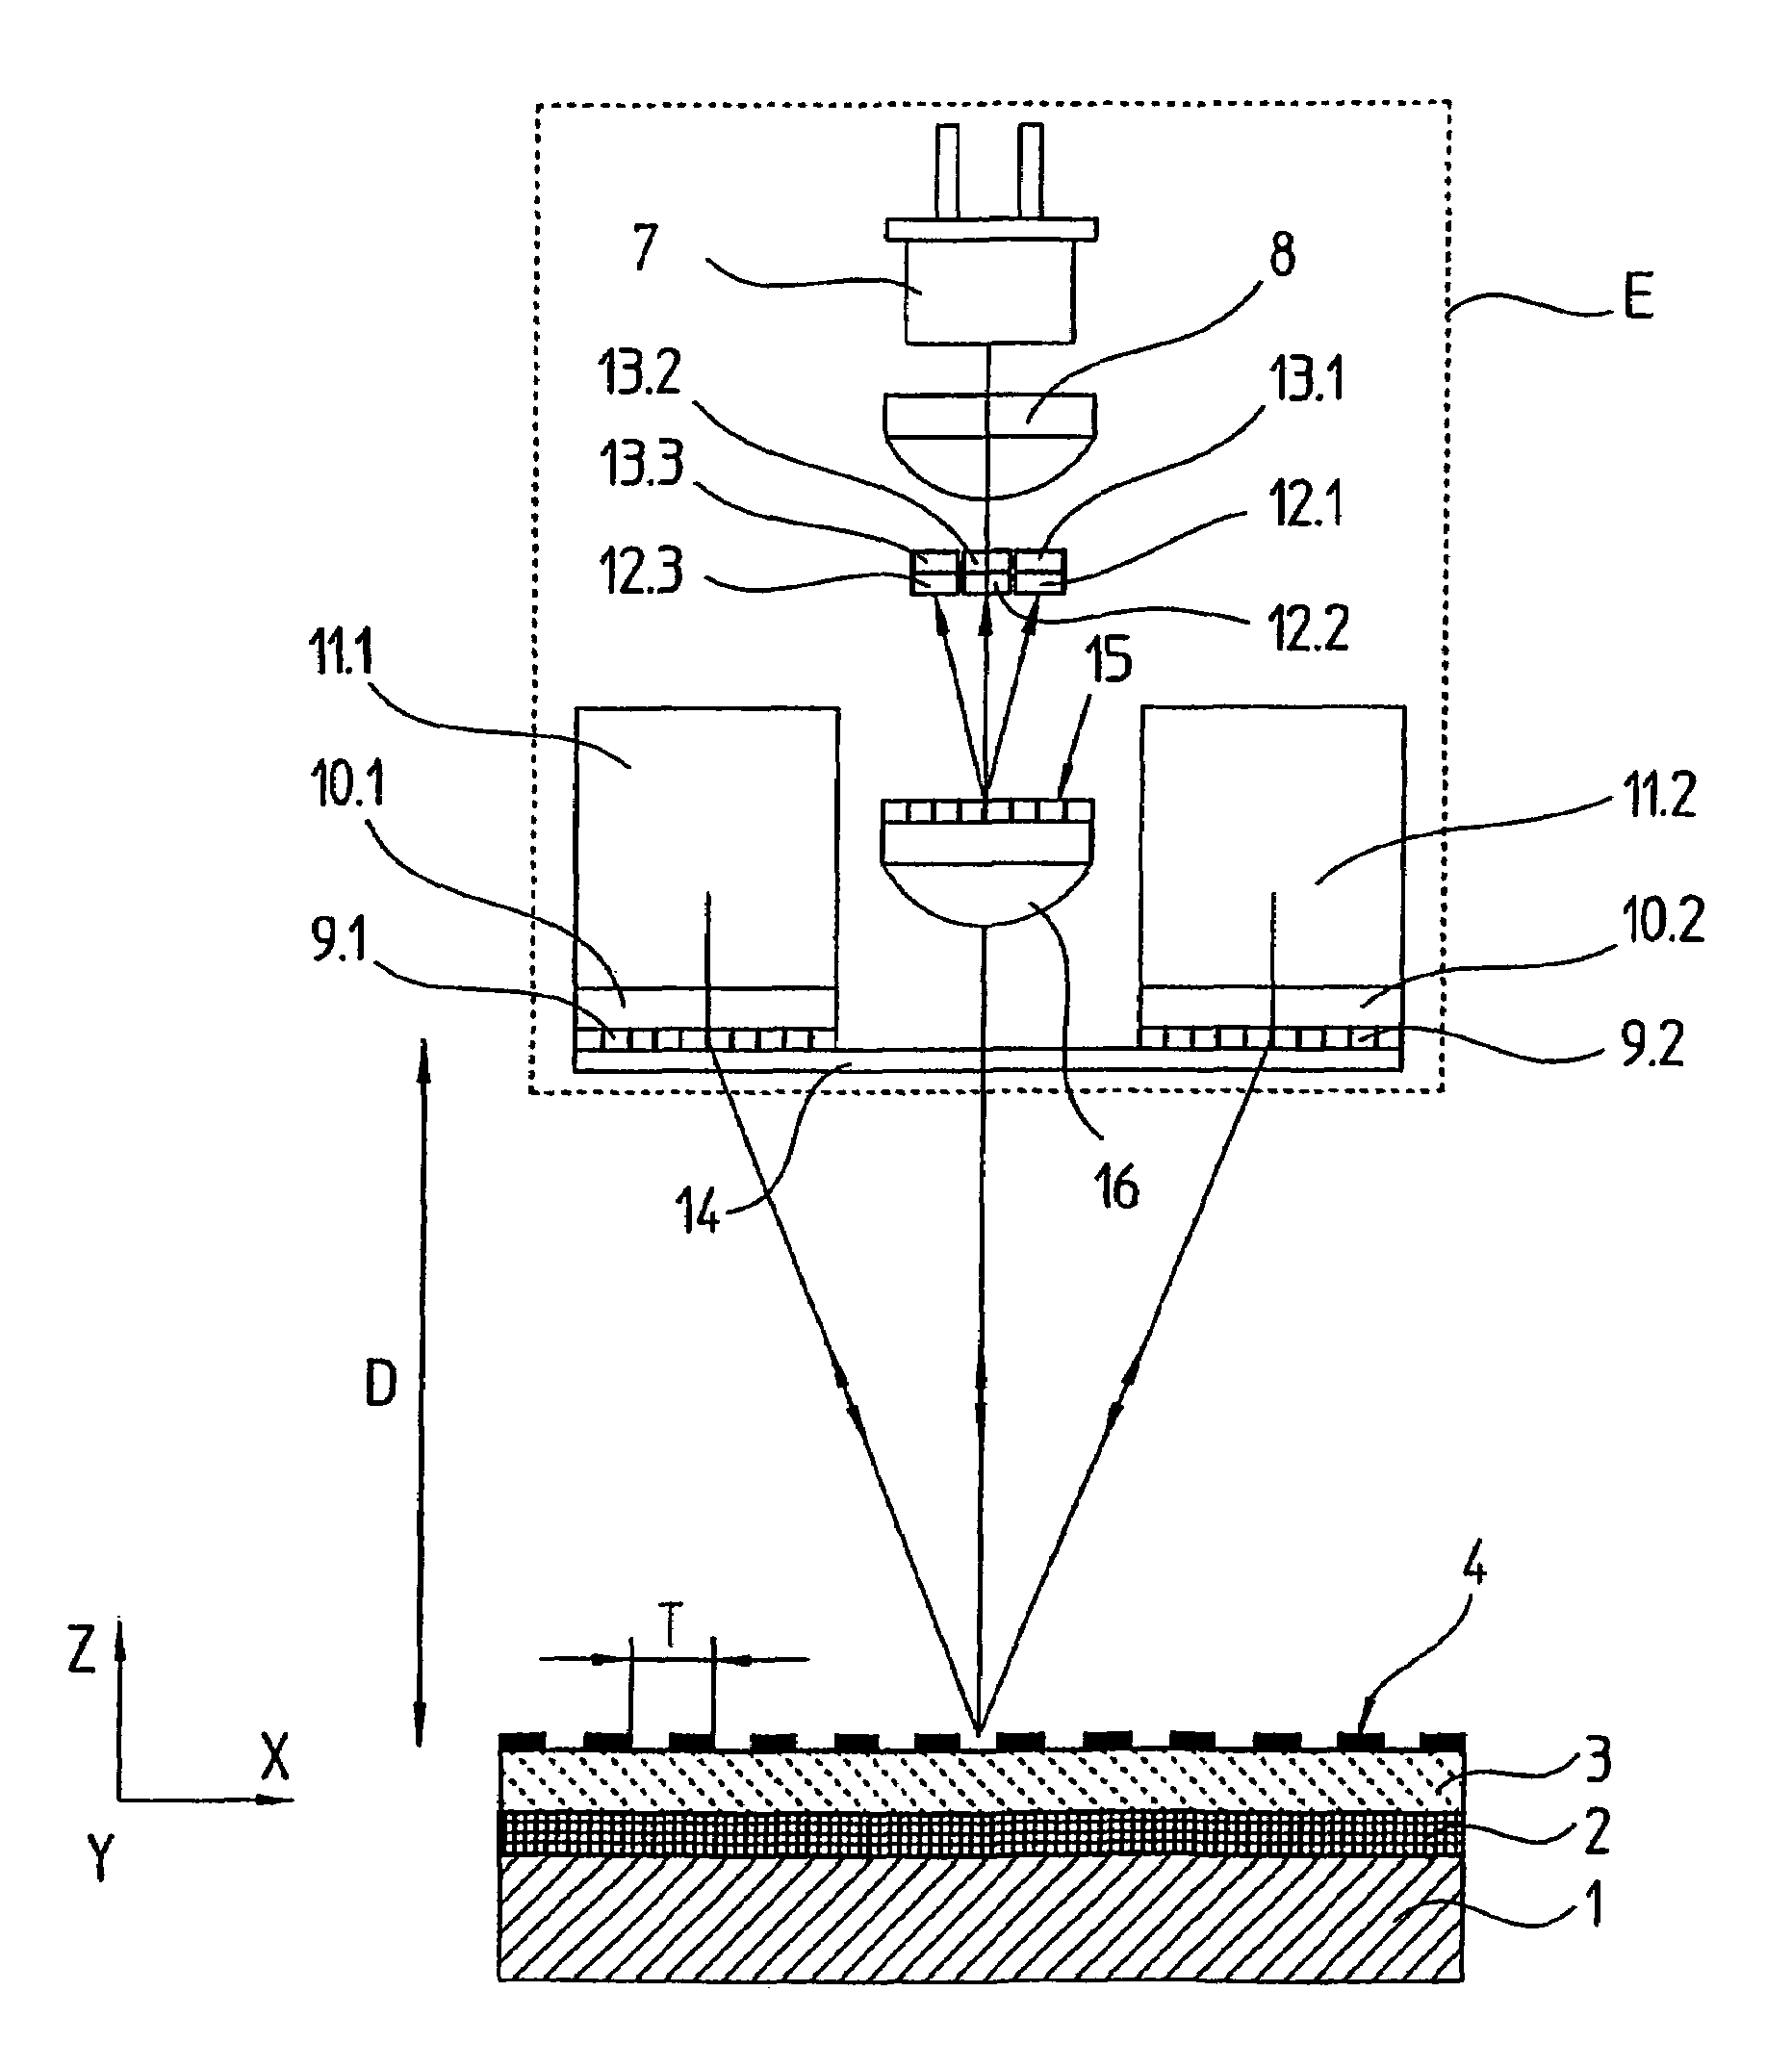 Method for manufacturing a scale, a scale manufactured according to the method and a position measuring device